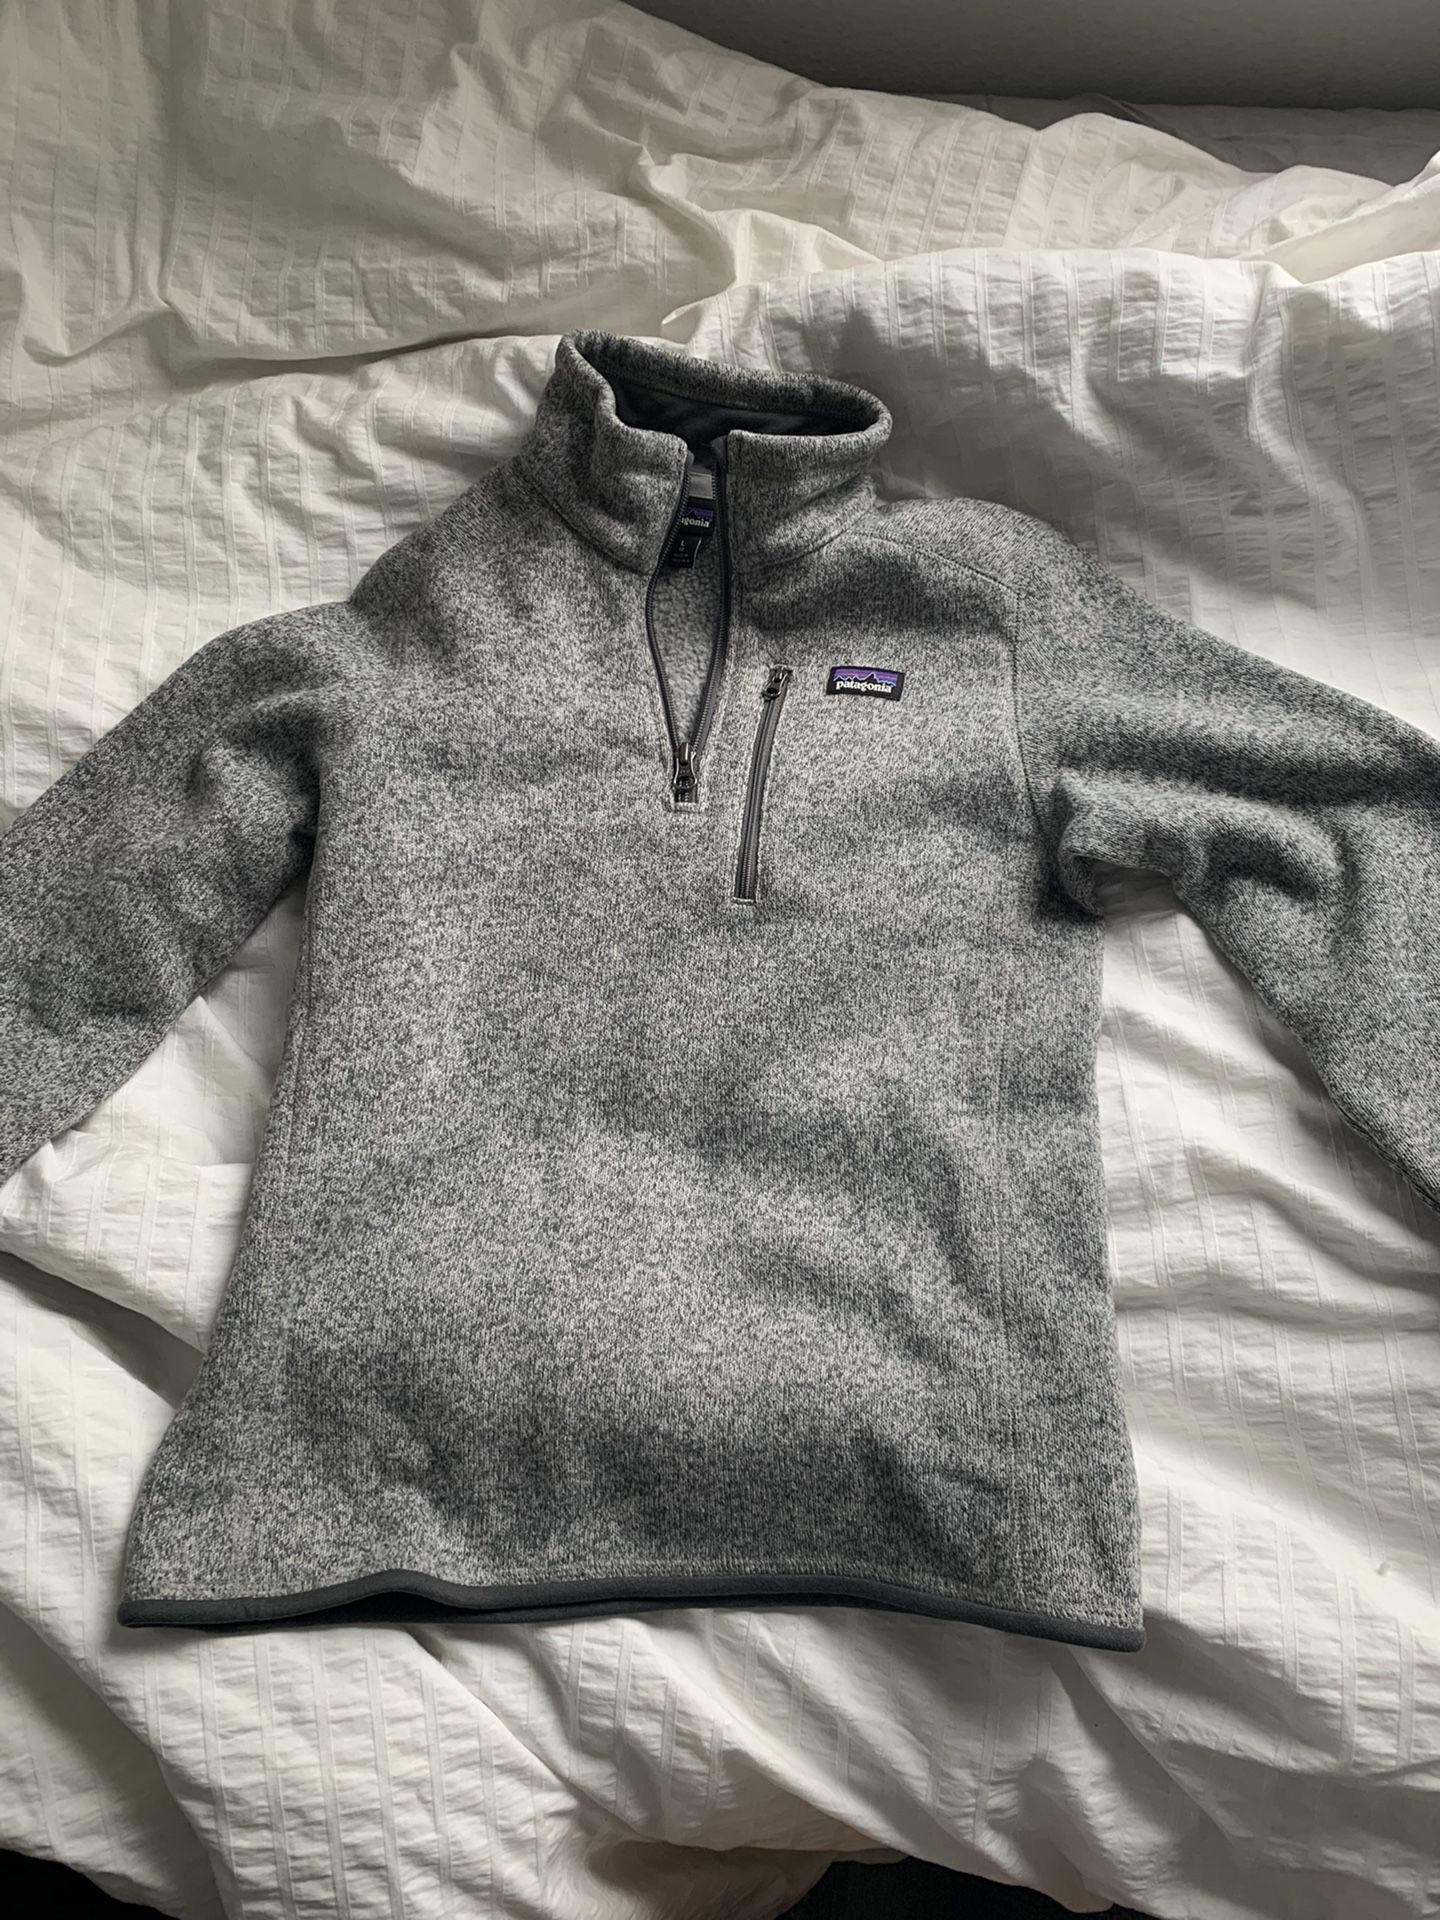 Youth L Patagonia sweater